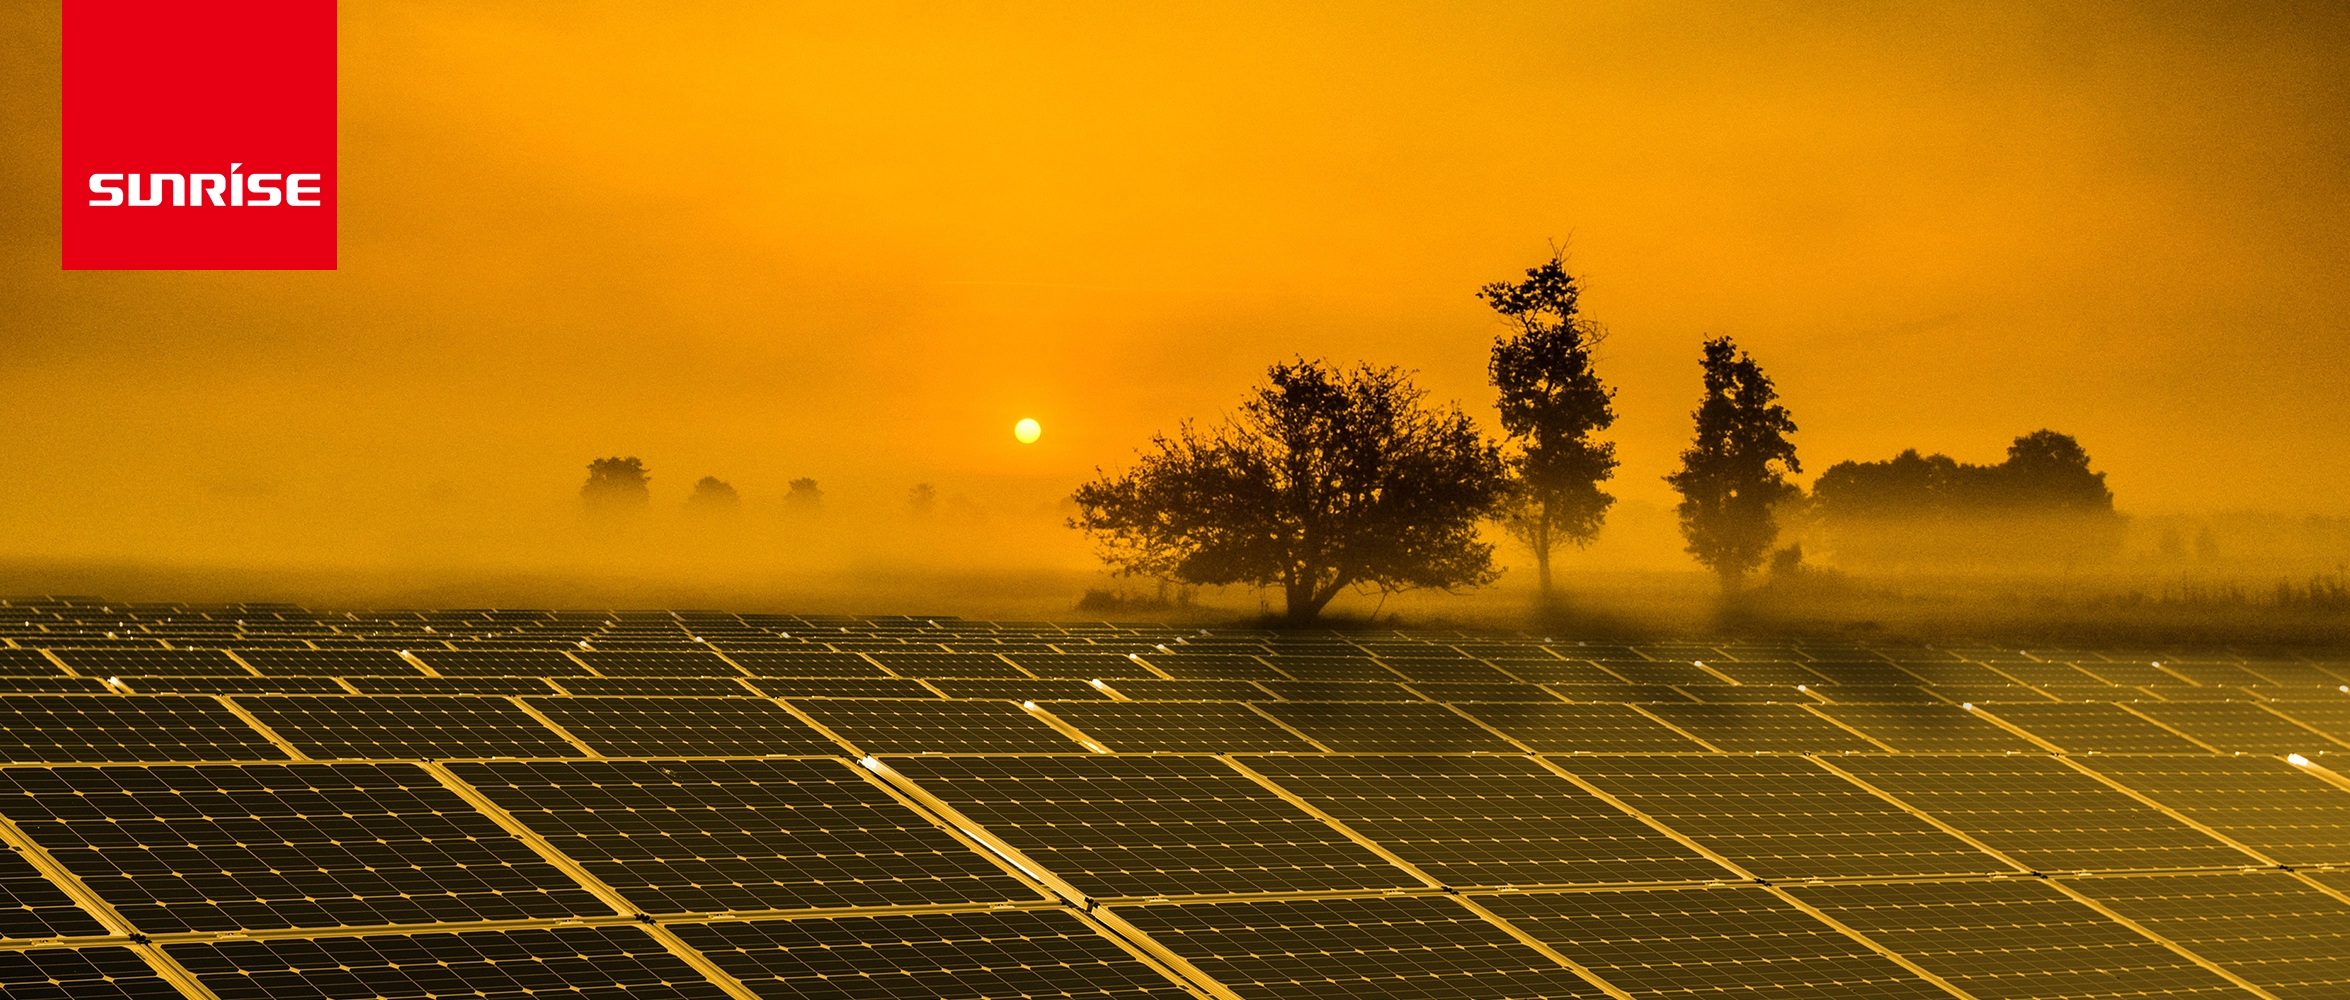 Solar Photovoltaic Power Systems Can Meet Various Harsh Working Environments Outdoors